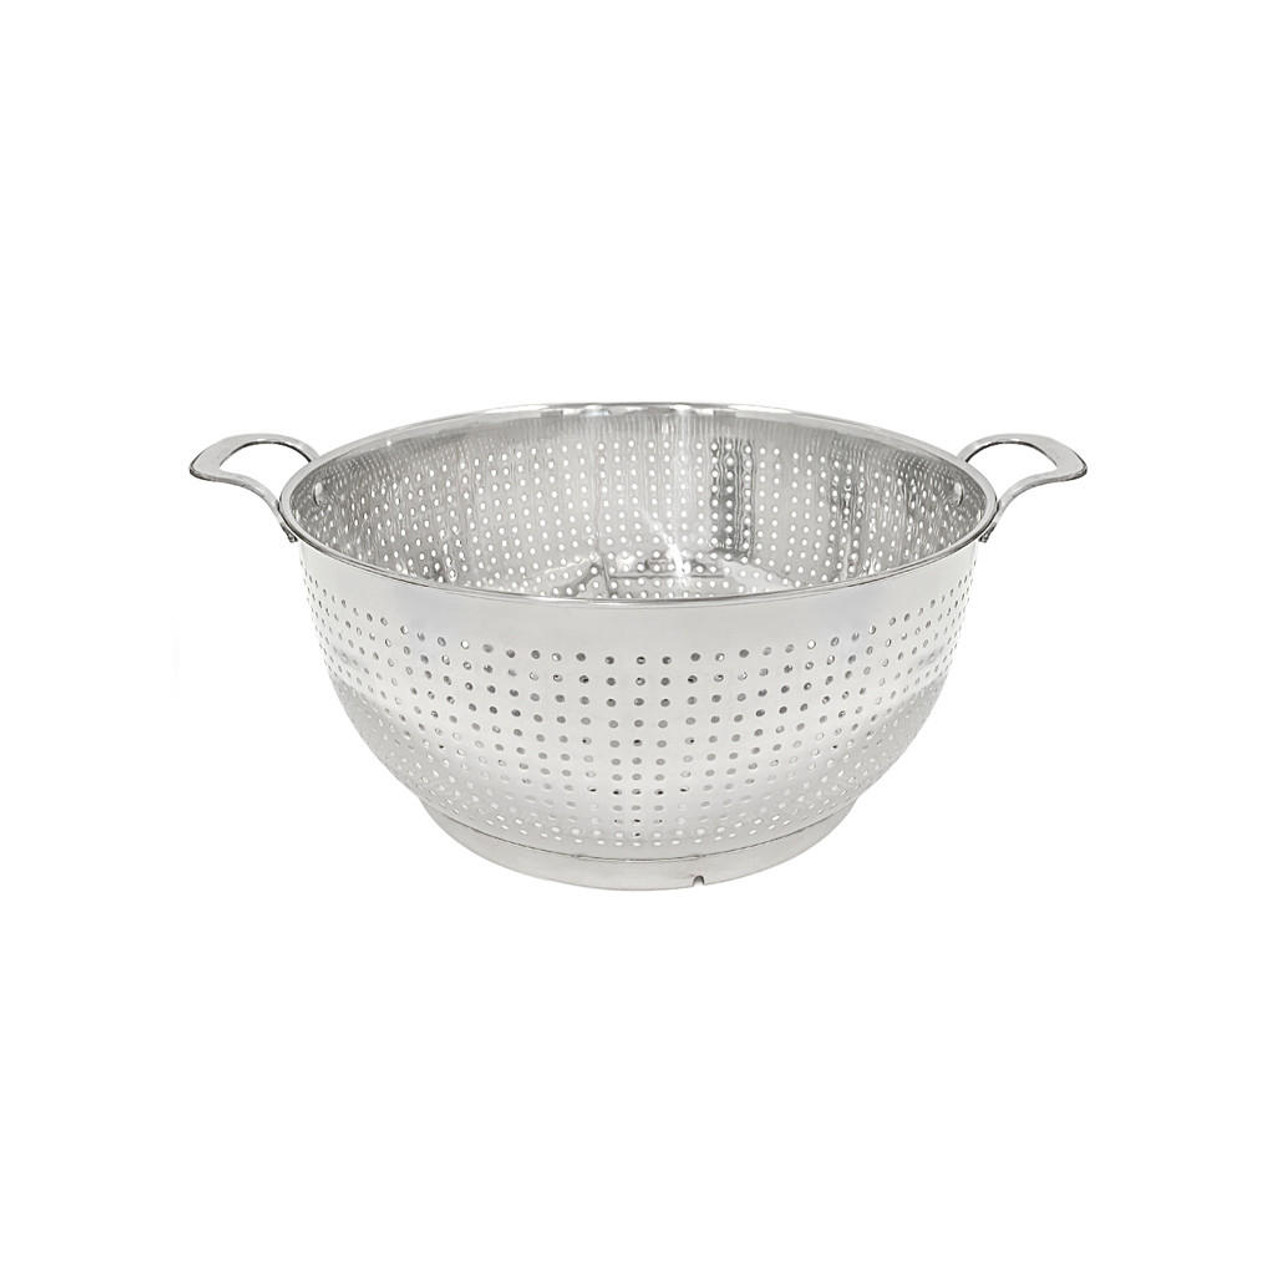 New Colander with Handles - Stainless Steel, 2Qt